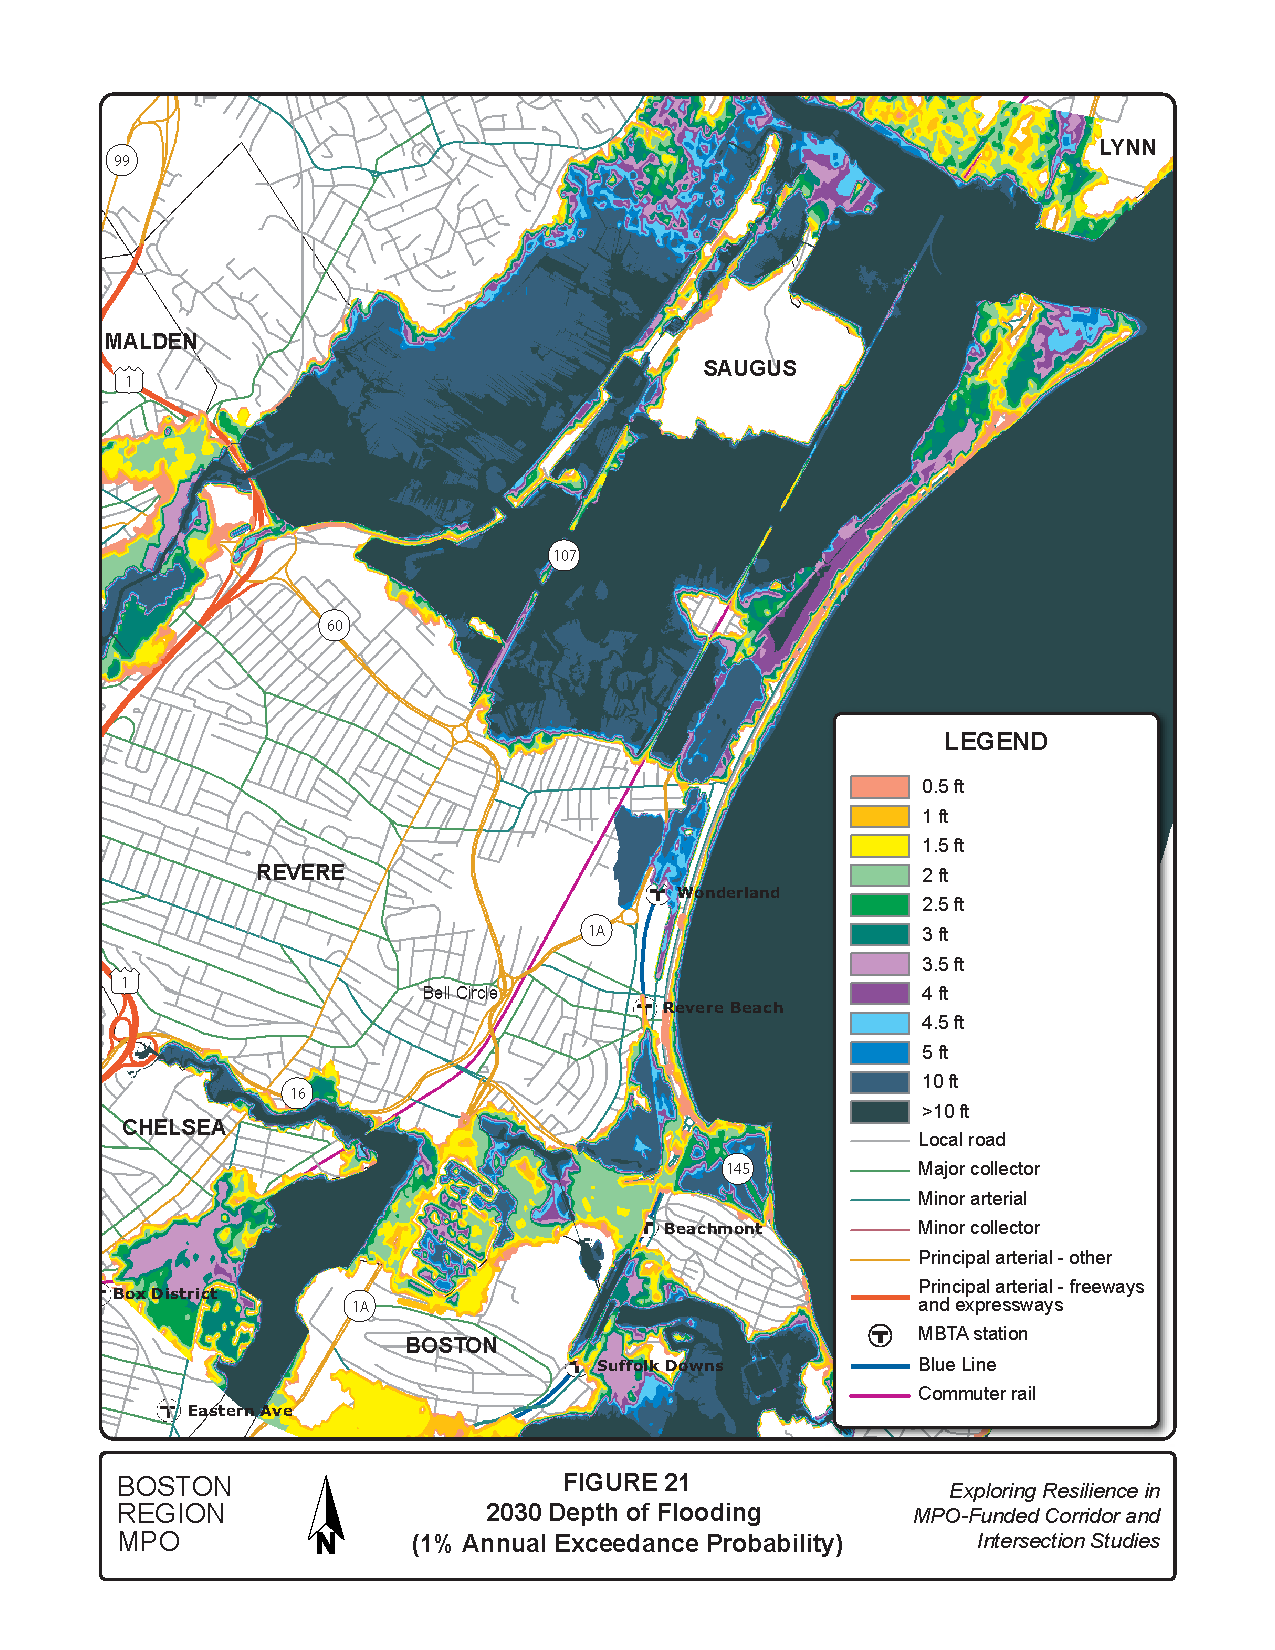 Figure 21 is a map of the study area showing the one percent flood depth for 2030.